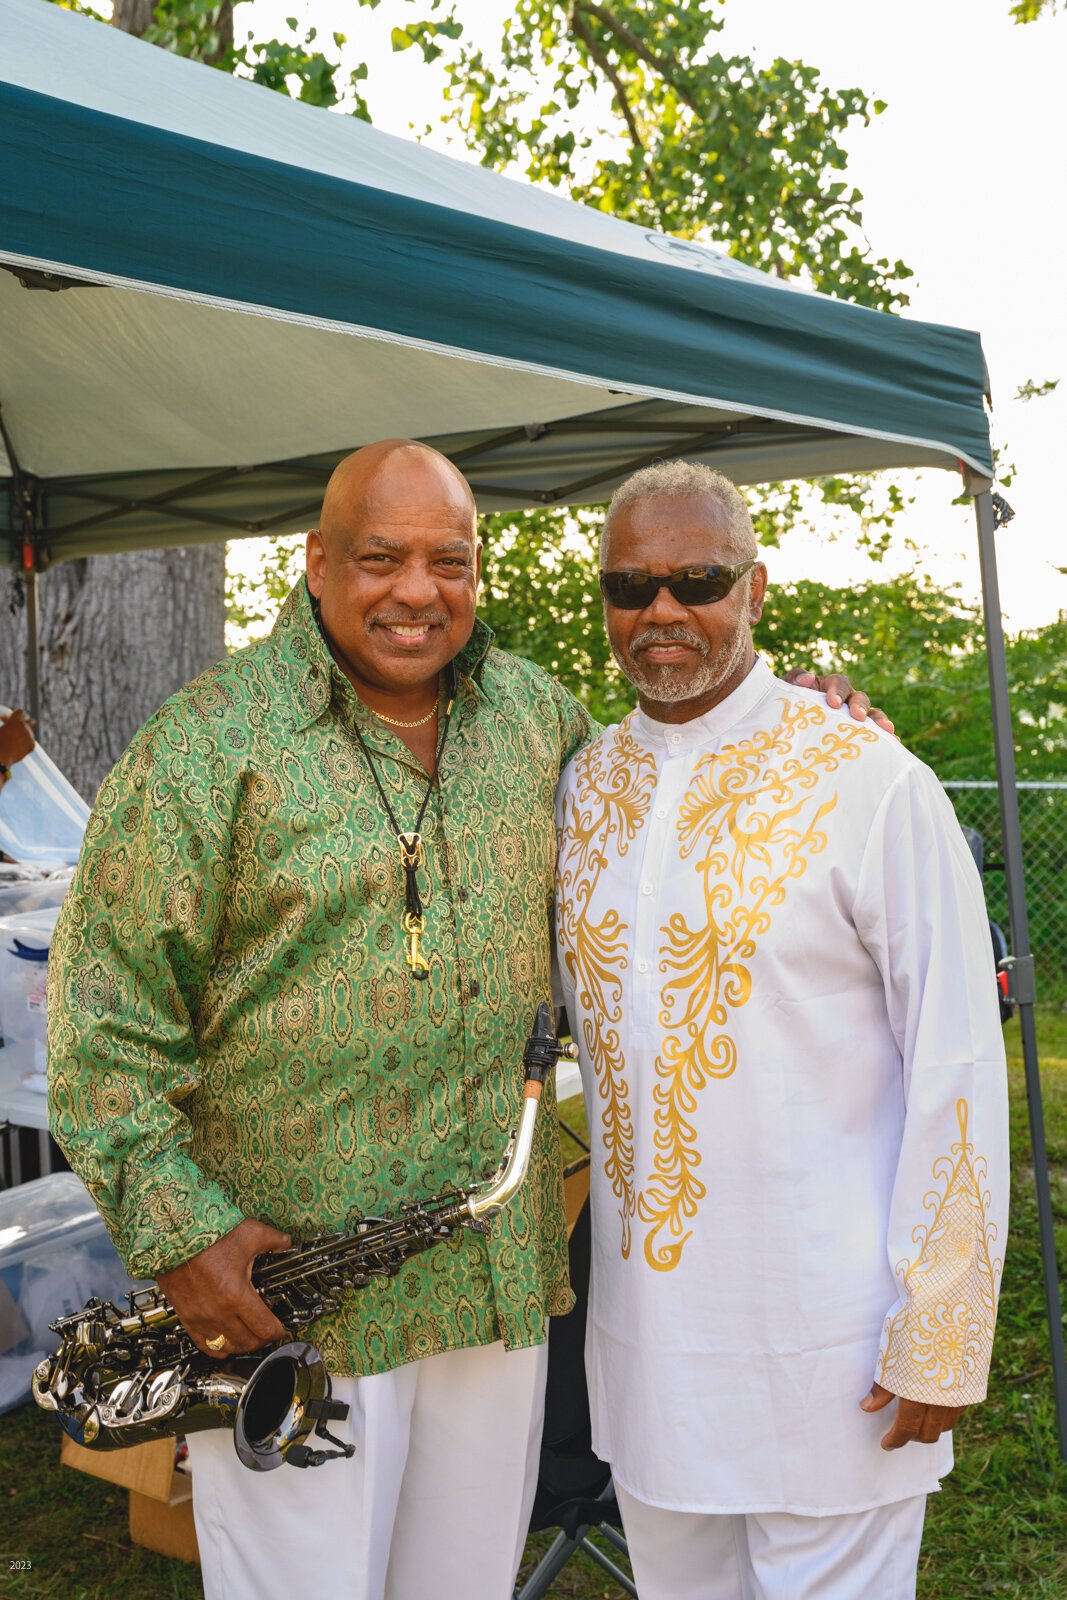 Gerald Albright and John E. Lawrence at Ford Lake Park.